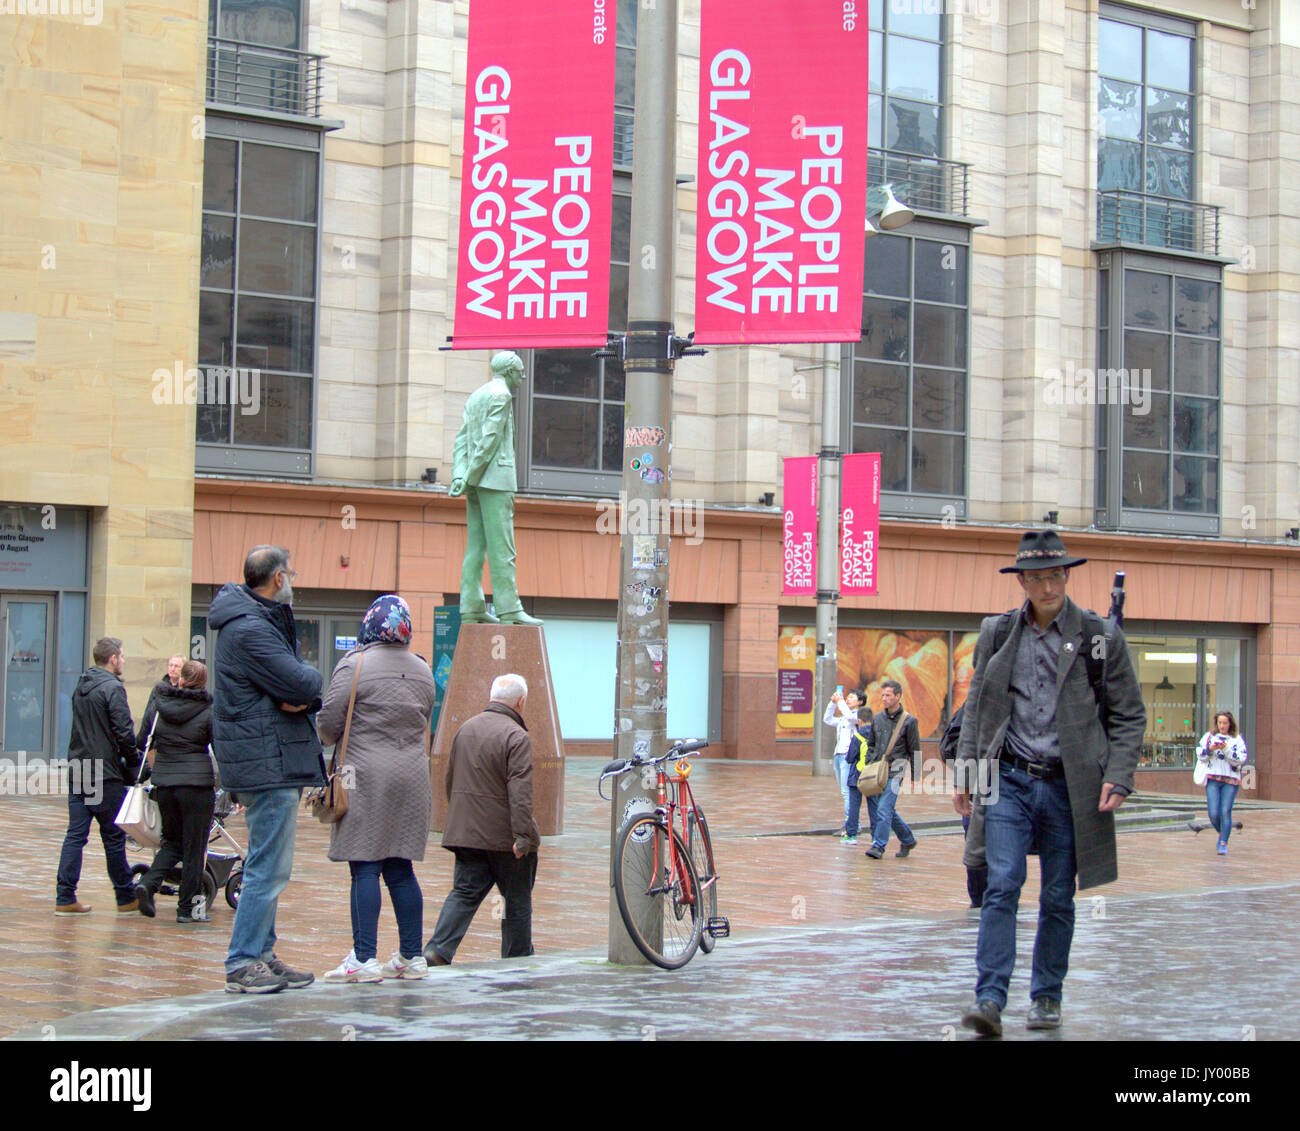 Buchanan street shopping area Donald Dewar statue  Asian included  people make Glasgow sign everyday shopping street scene crowds Stock Photo